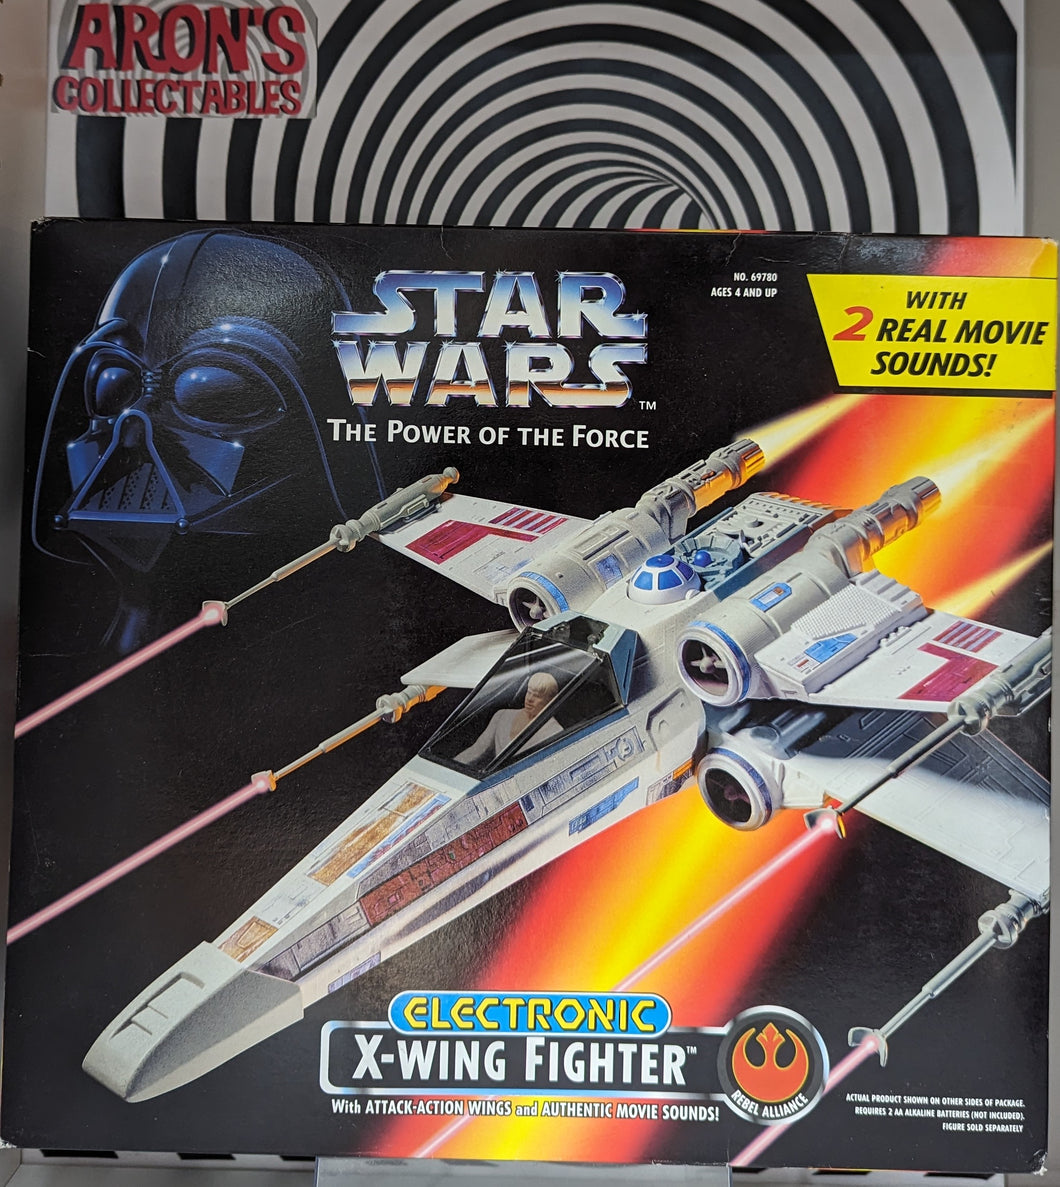 Star Wars Power of the Force Electronic X-Wing Starfighter Vehicle